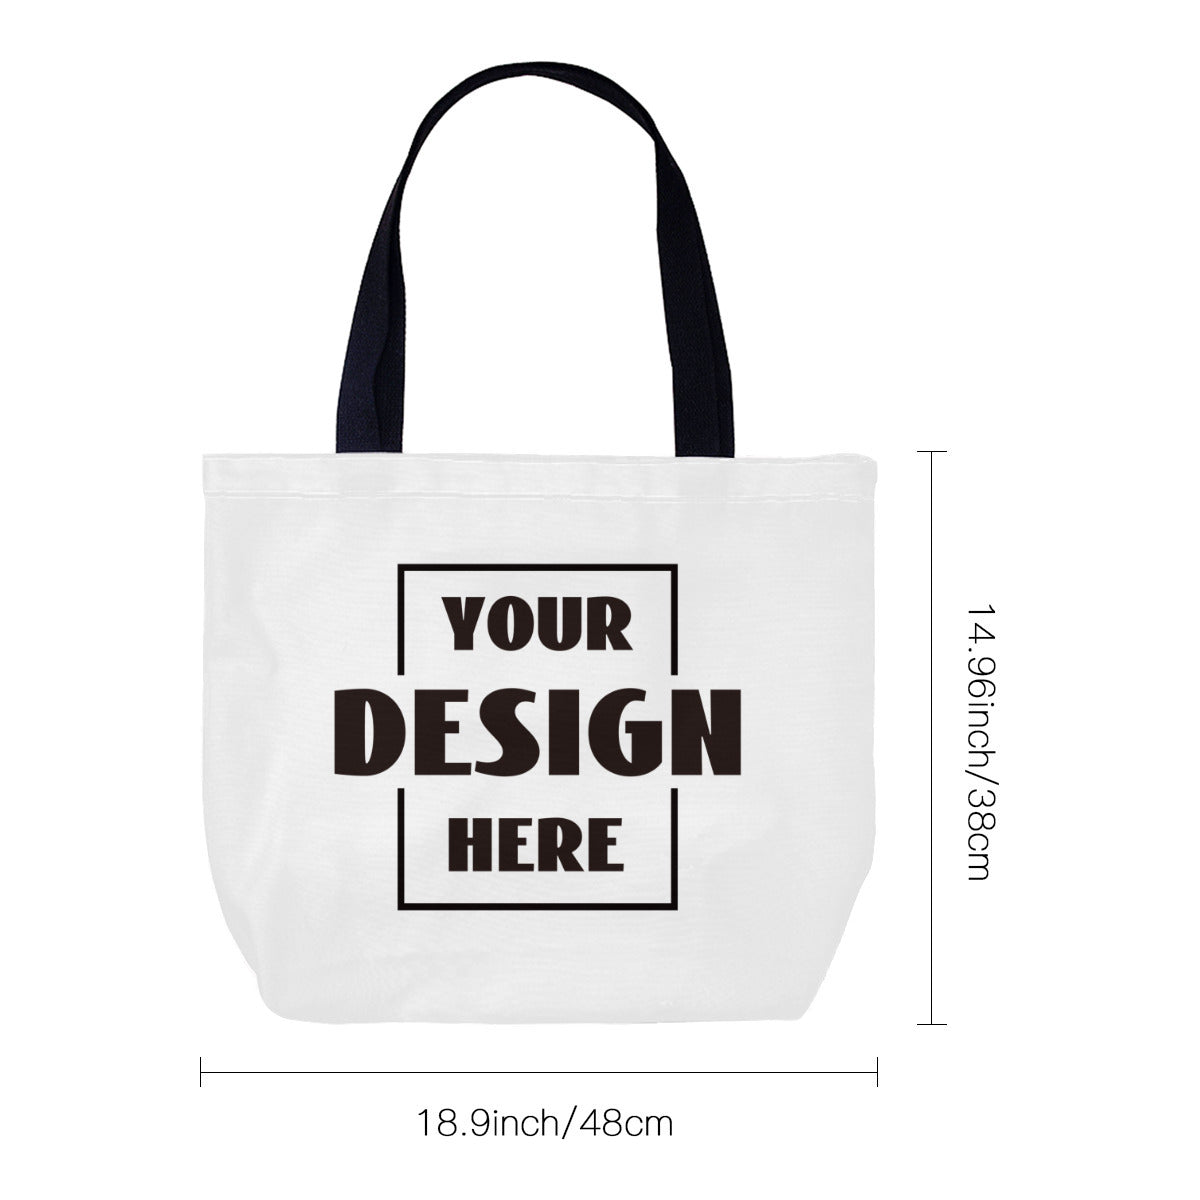 This tote bag is 18.9 inch long and 14.96 inch high.